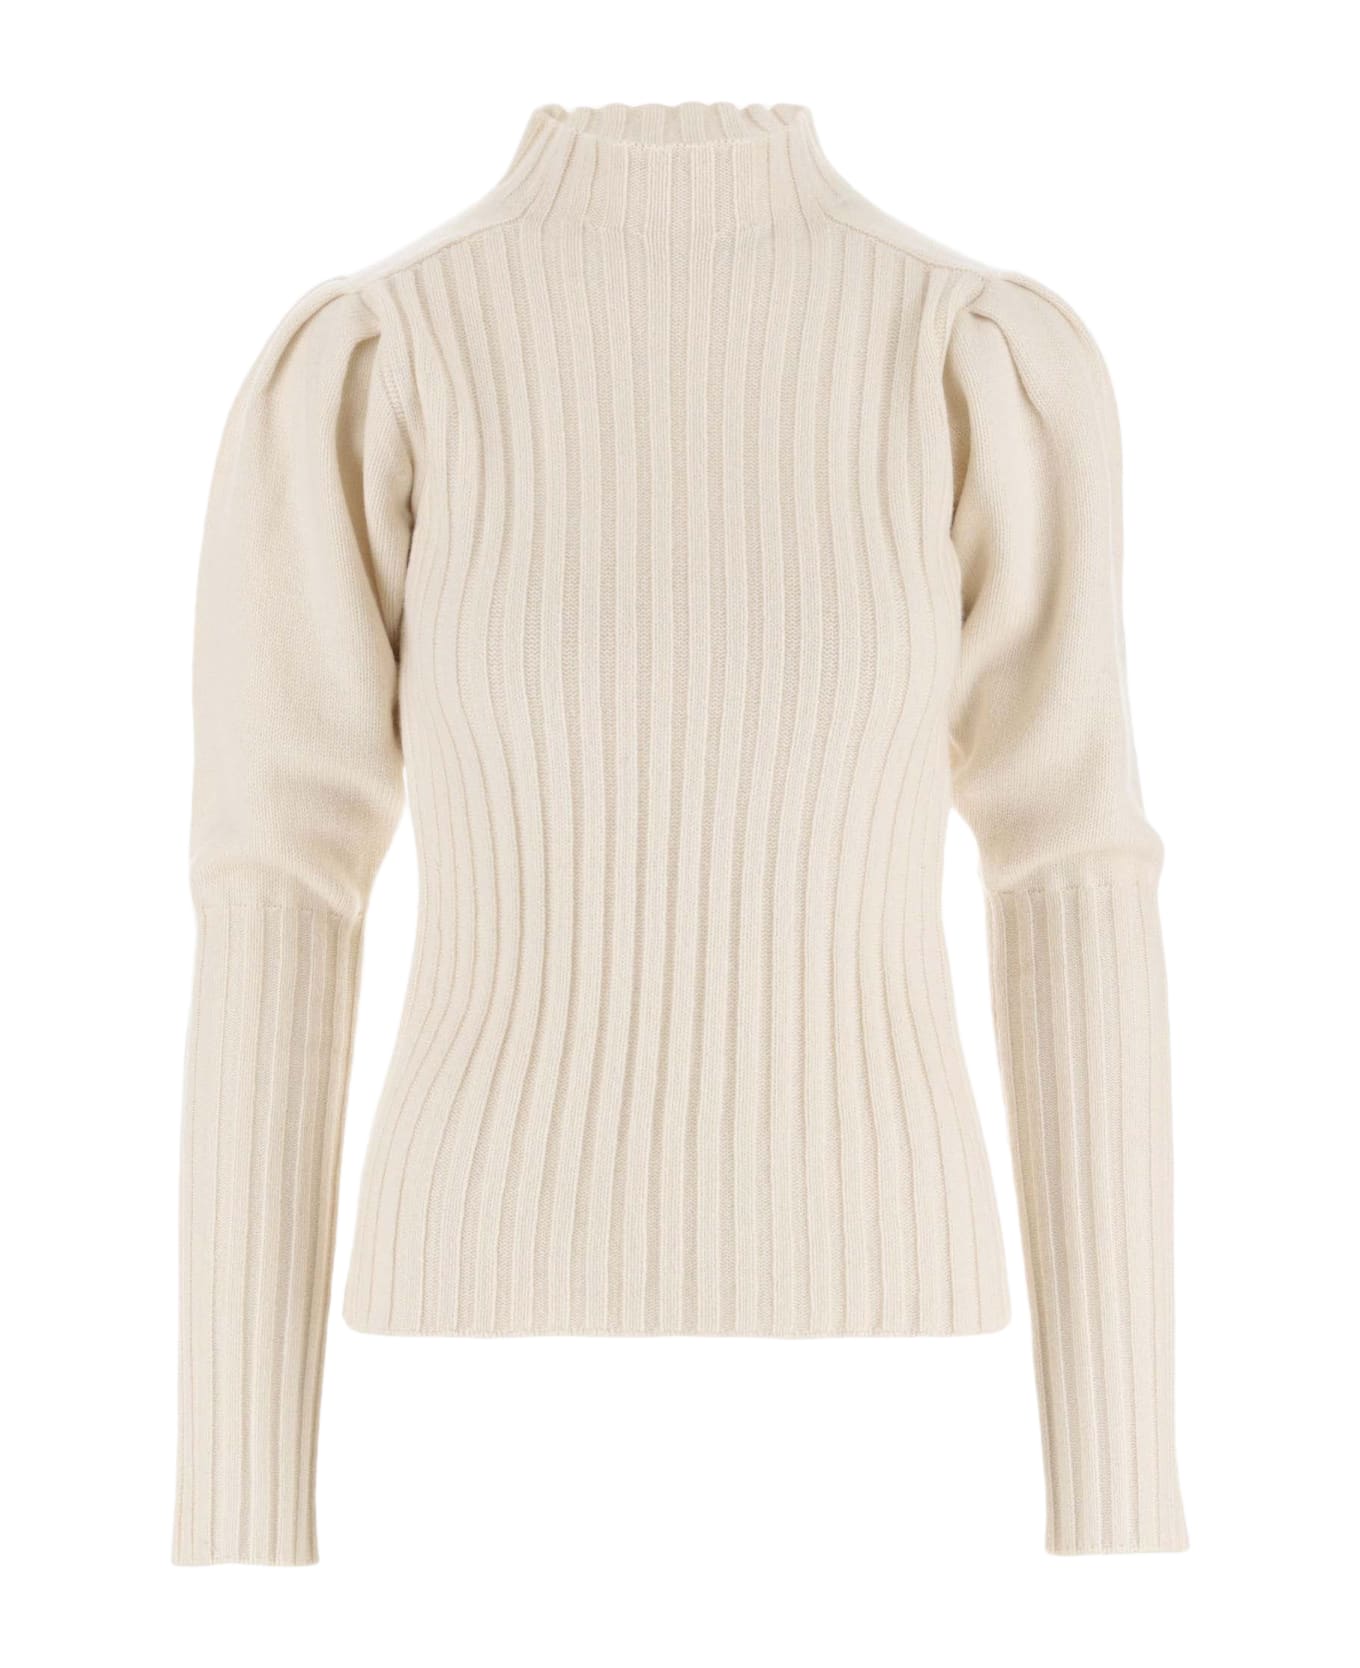 Chloé Cashmere Sweater With Balloon Sleeves - Ivory ニットウェア